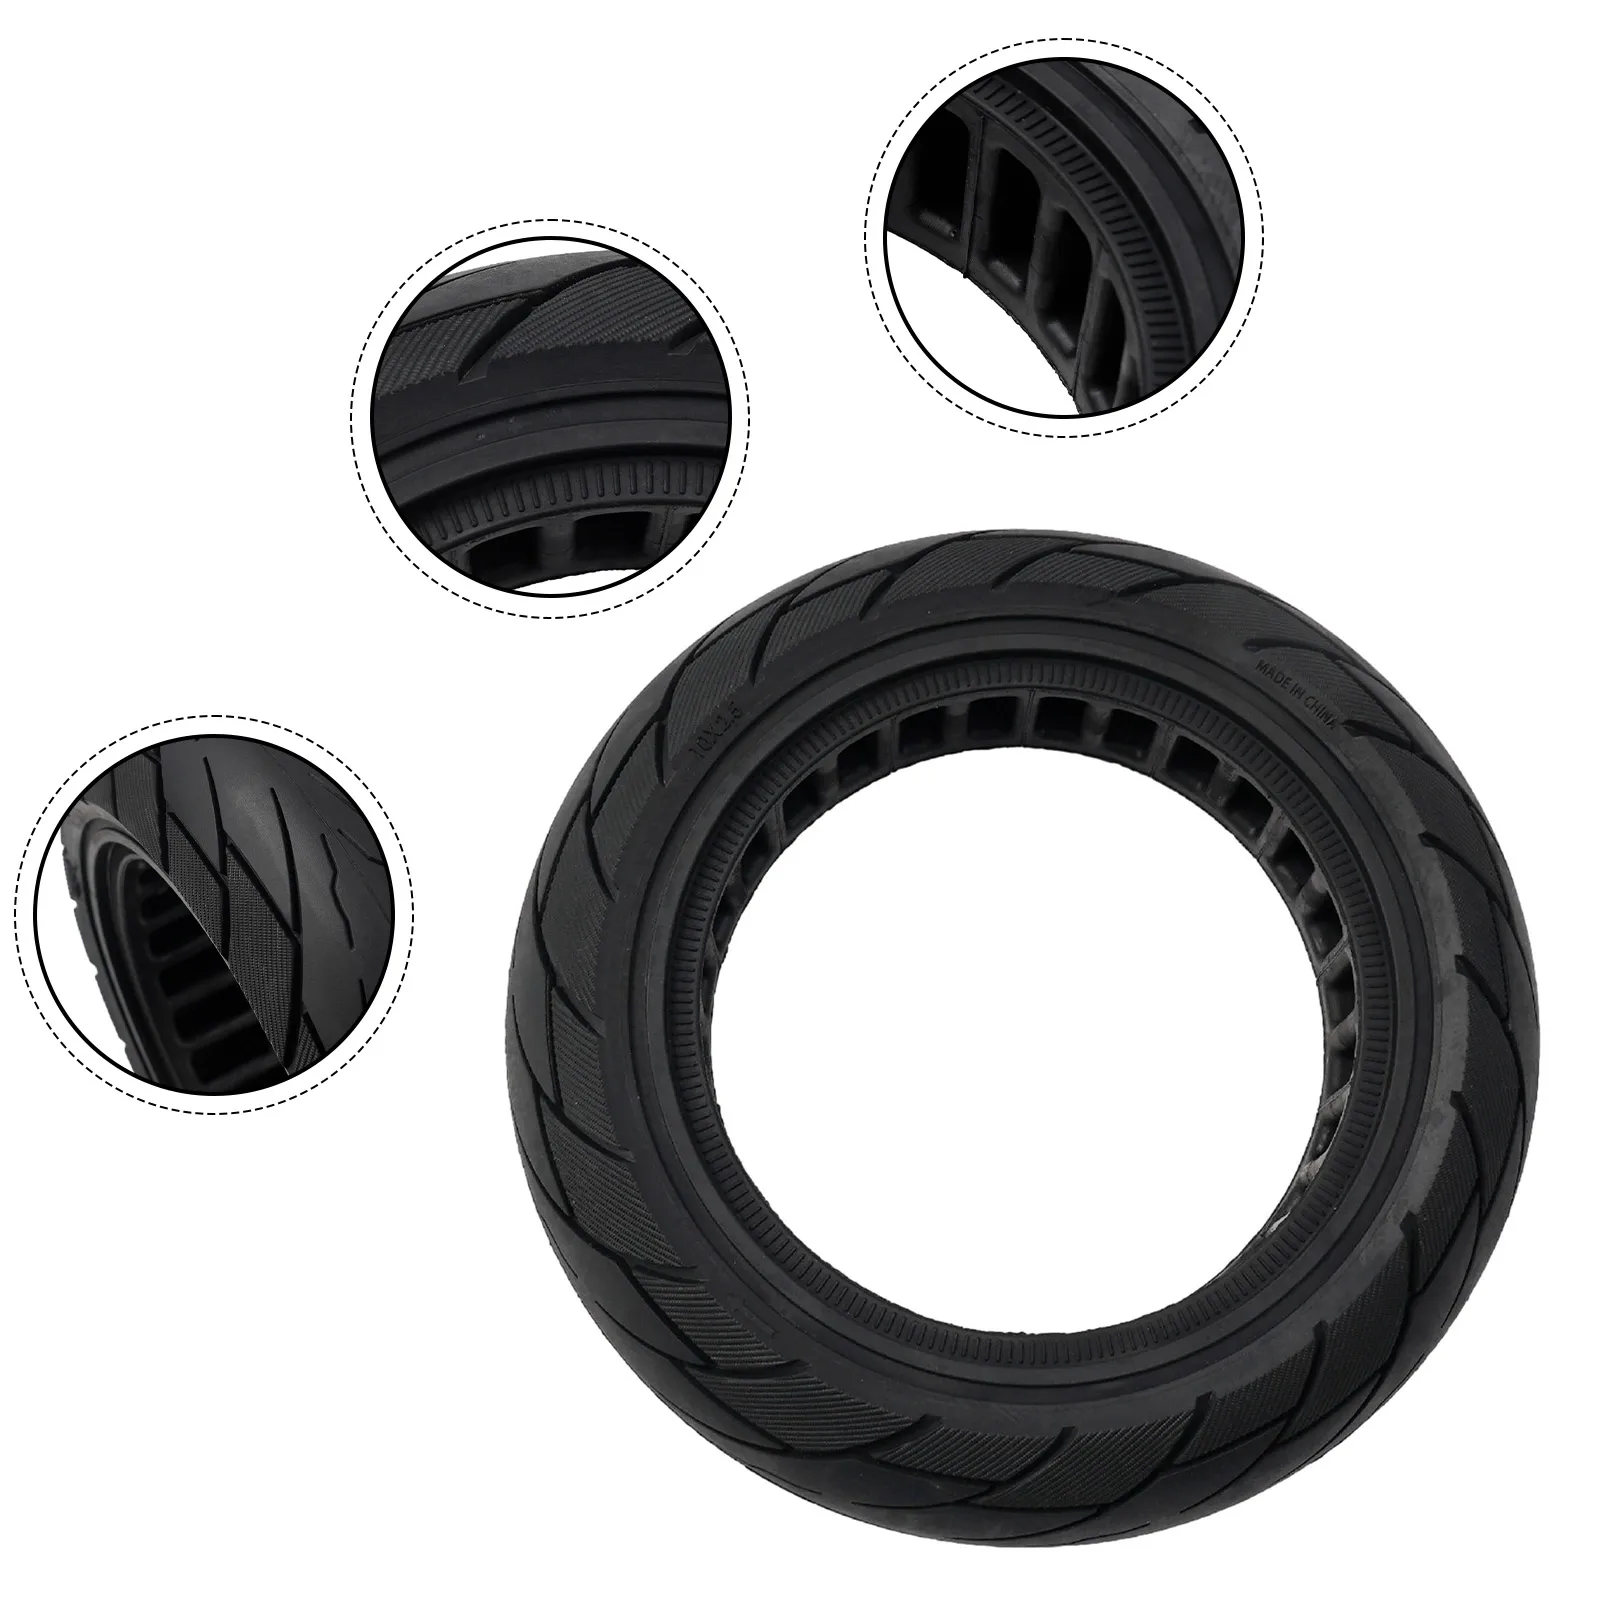 

Practical Useful Brand New High Quality Solid Tyre 10x2.50 Fittings Off-road Parts Replacement Rubber Accessories Black